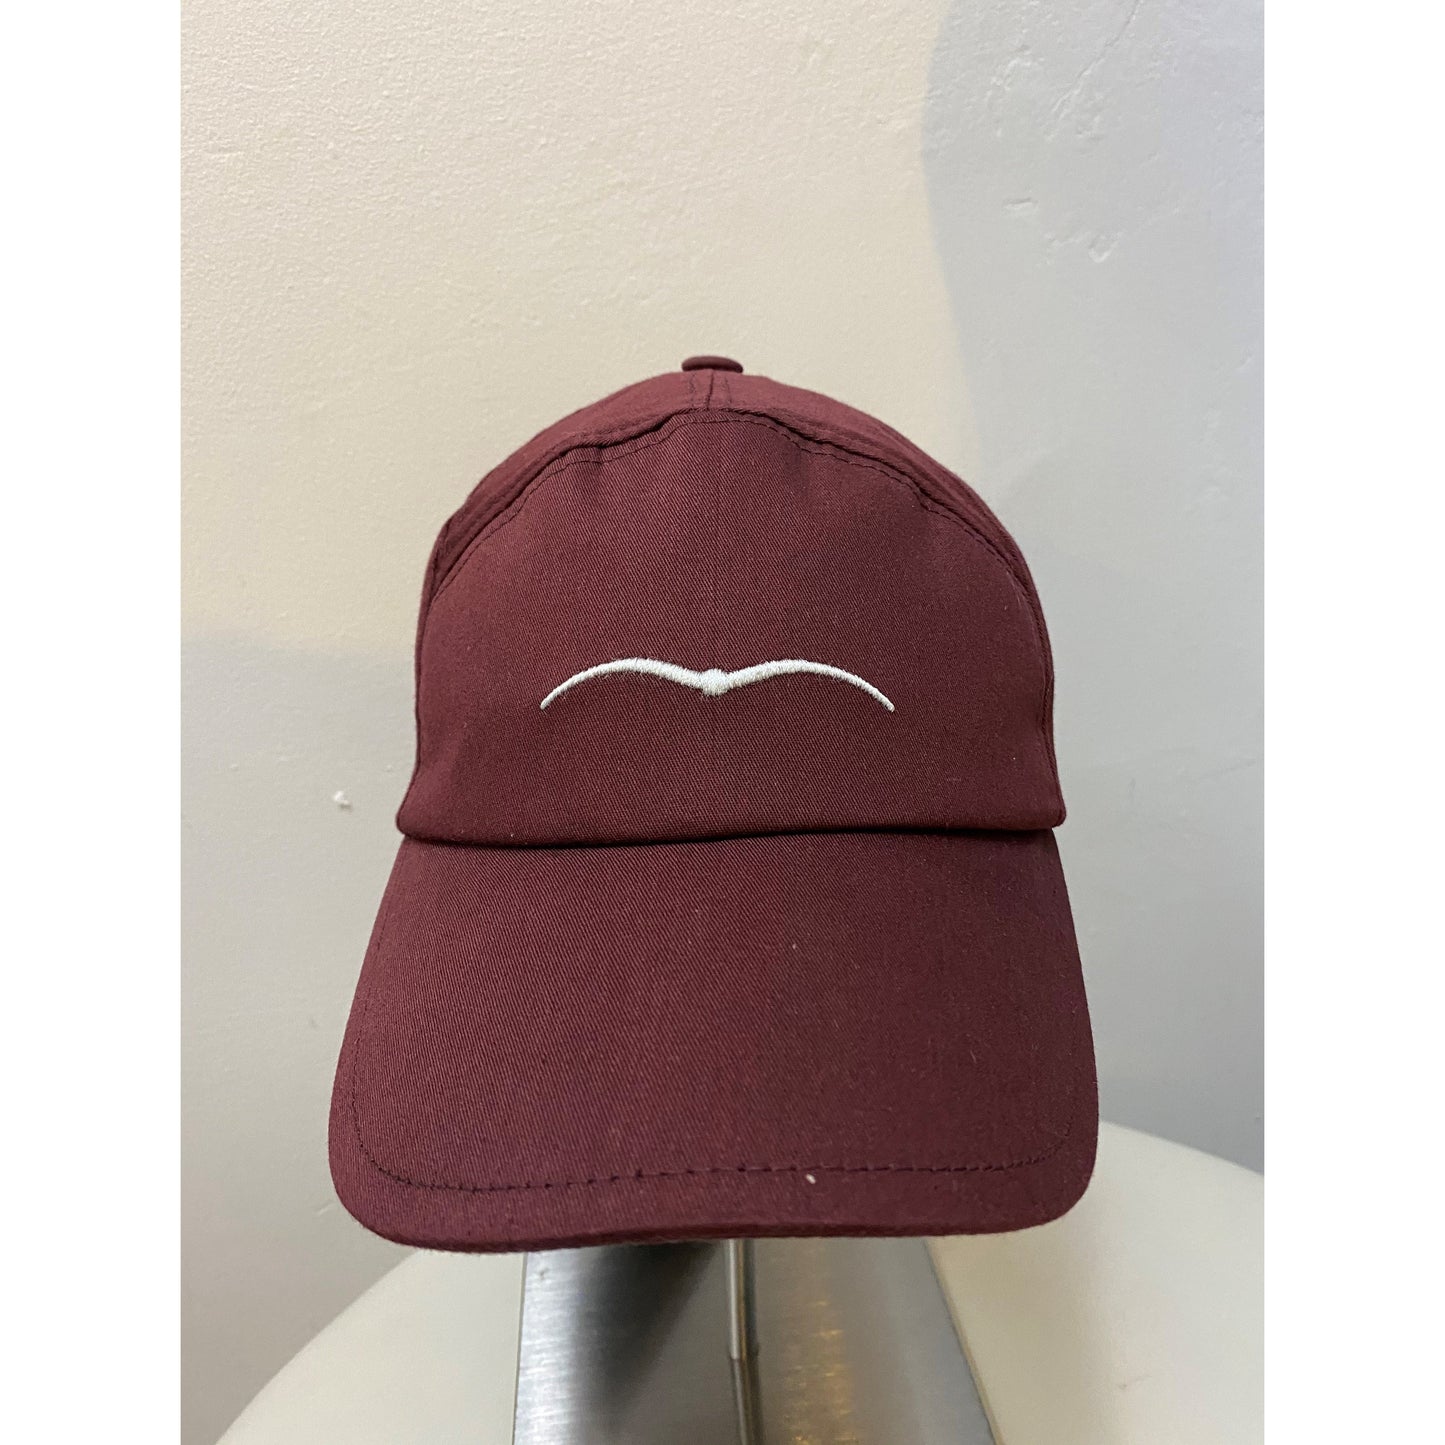 Animo brand maroon baseball cap with white logo on front.